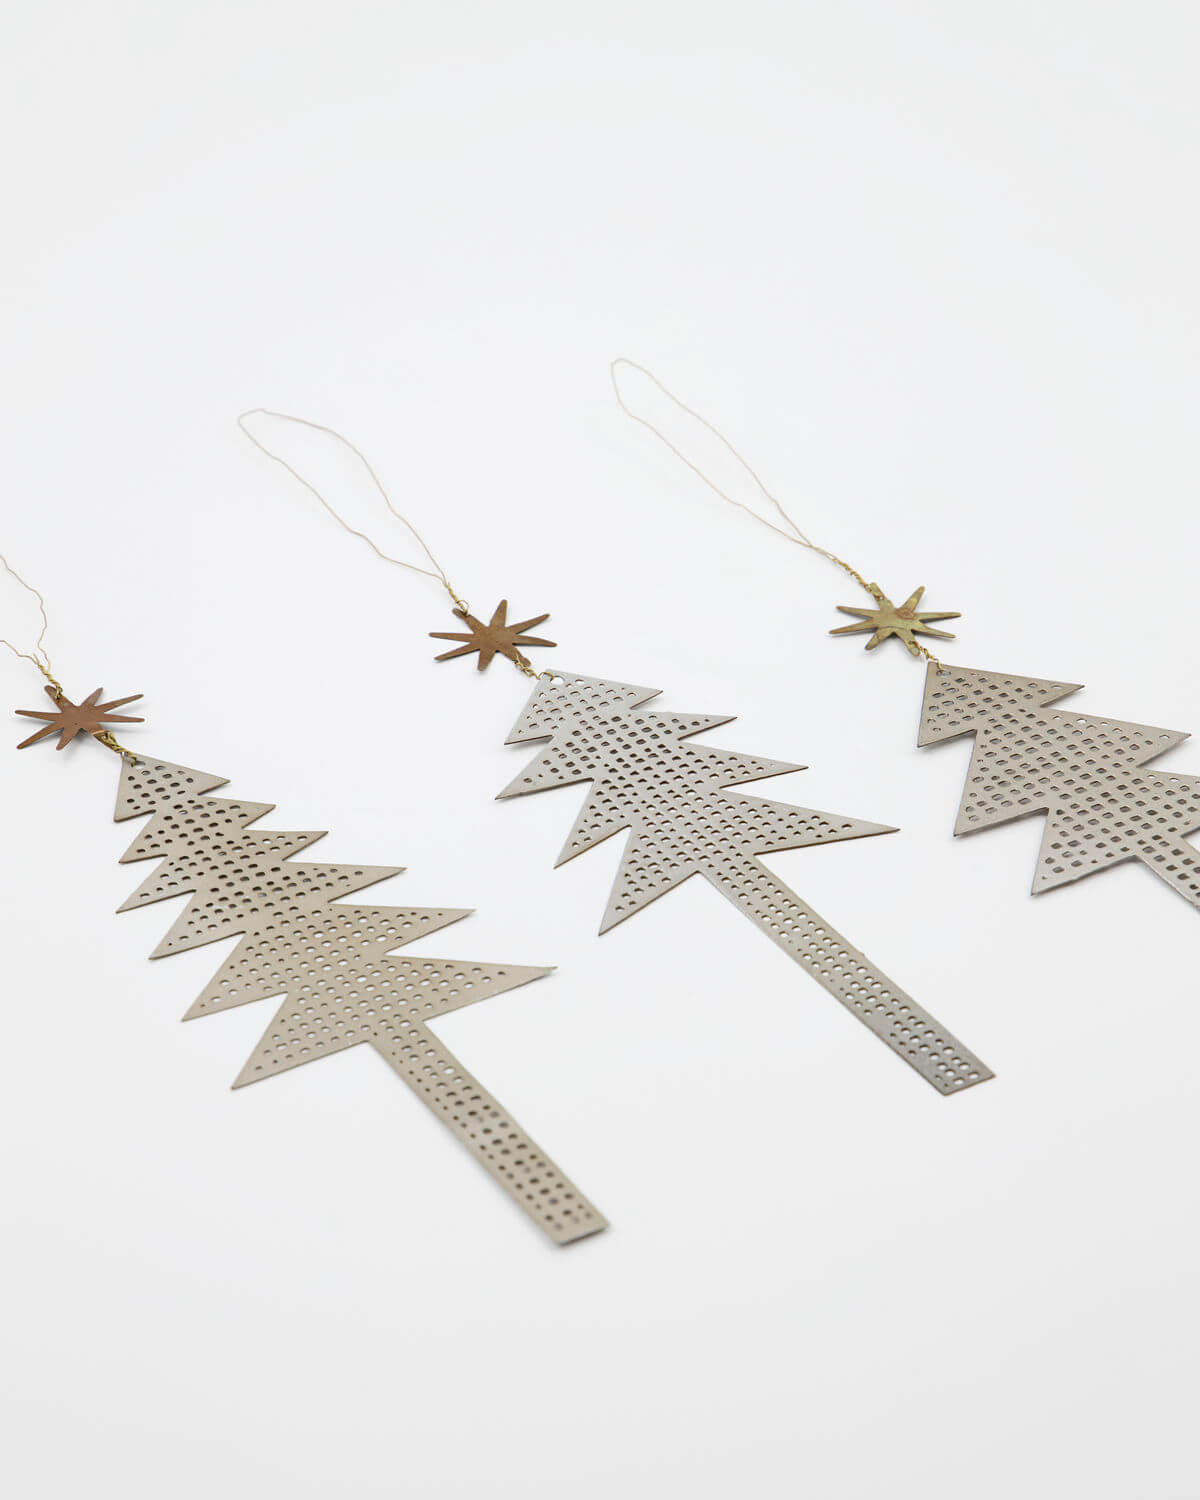 Tree with Star - Ornaments | Set of 3 | Antique Silver | by House Doctor - Lifestory - House Doctor